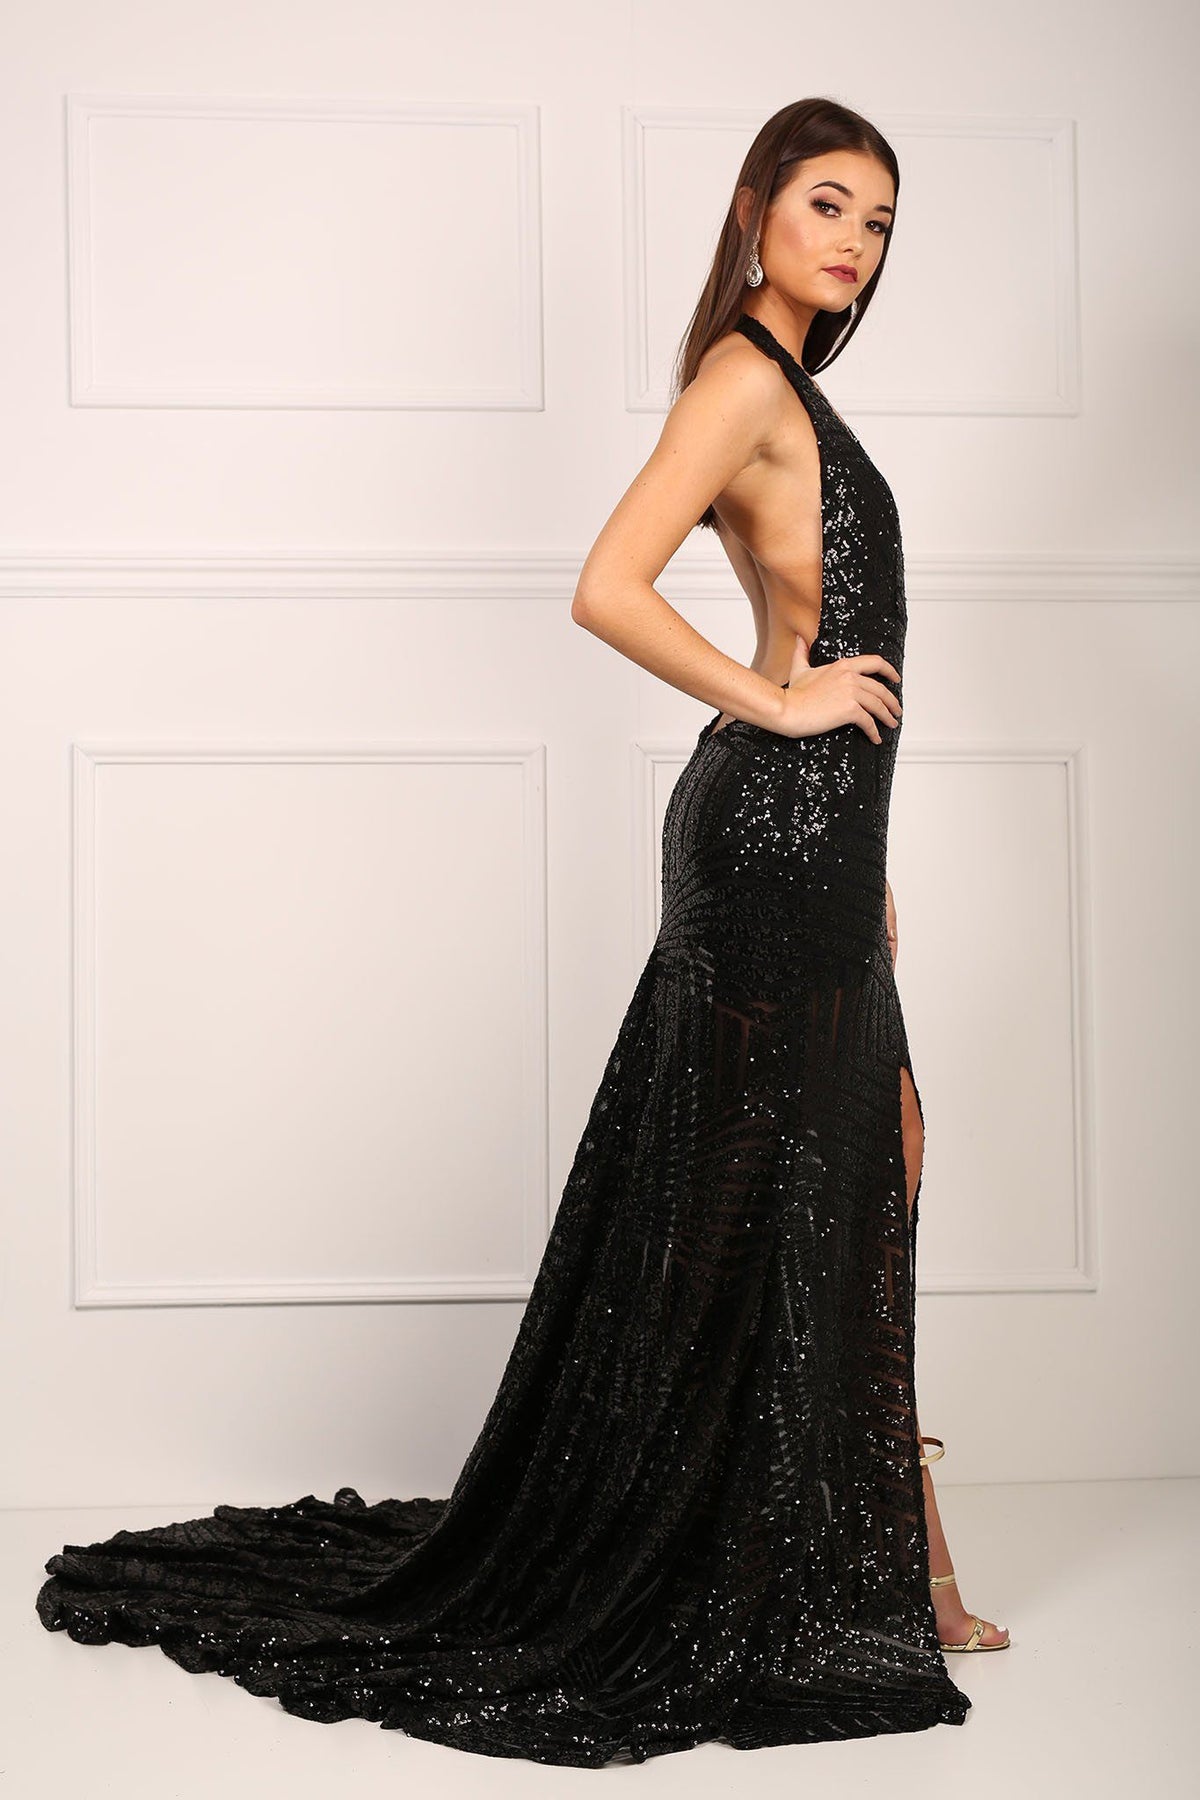 Side of black sequinned mermaid evening gown with halter v plunge neck and high centre front leg slit